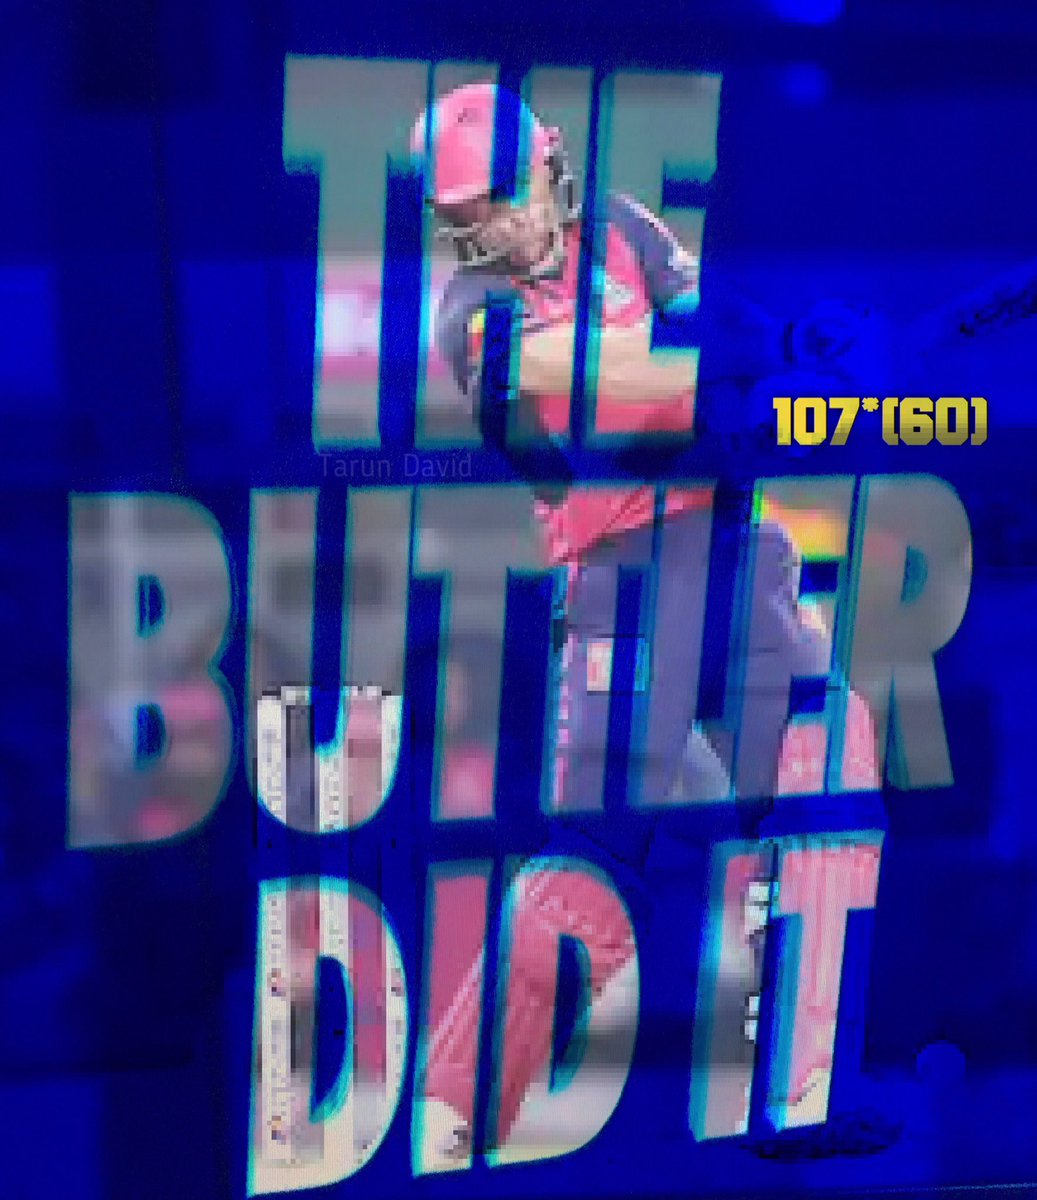 An INNINGS of EPIC PROPORTIONS!!

Jos BUTTLER—the last man standing!! 107*(60)

Equal-Highest IPL Run Chase-224!👏

@josbuttler @rajasthanroyals #josbuttler #rajasthanroyals #edengardens #ipl2024 @IPL